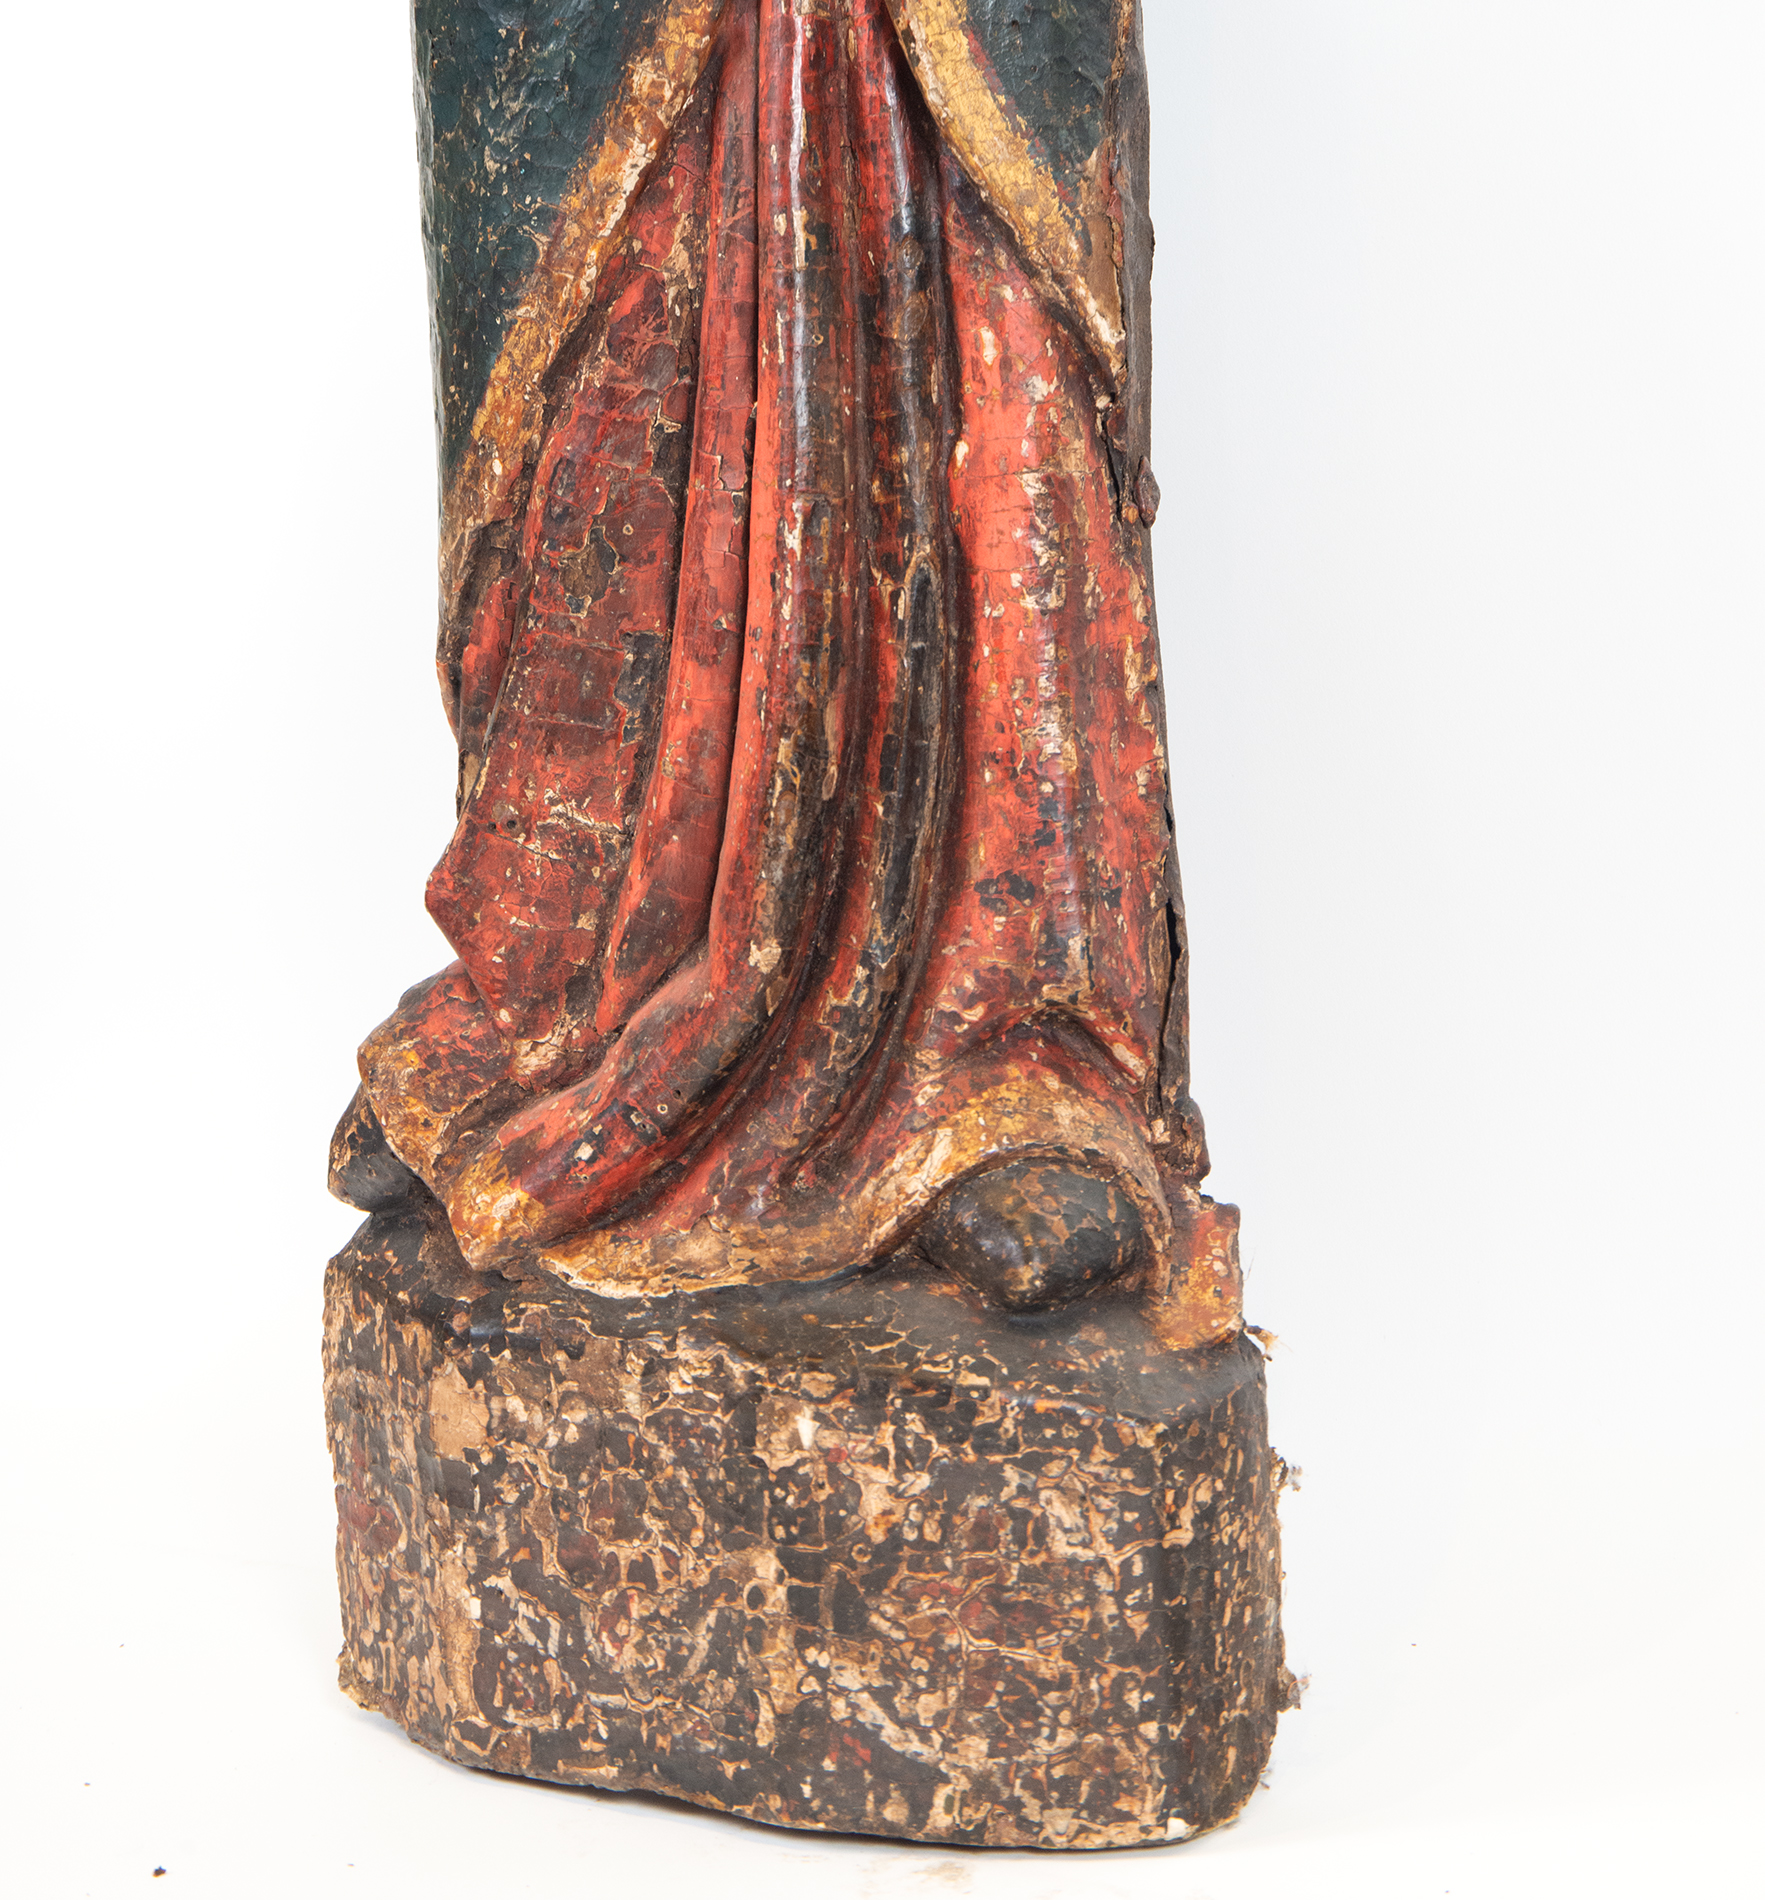 Pair of Large Romanesque Carvings representing Mary and Saint John the Evangelist, Romanesque School - Image 18 of 22